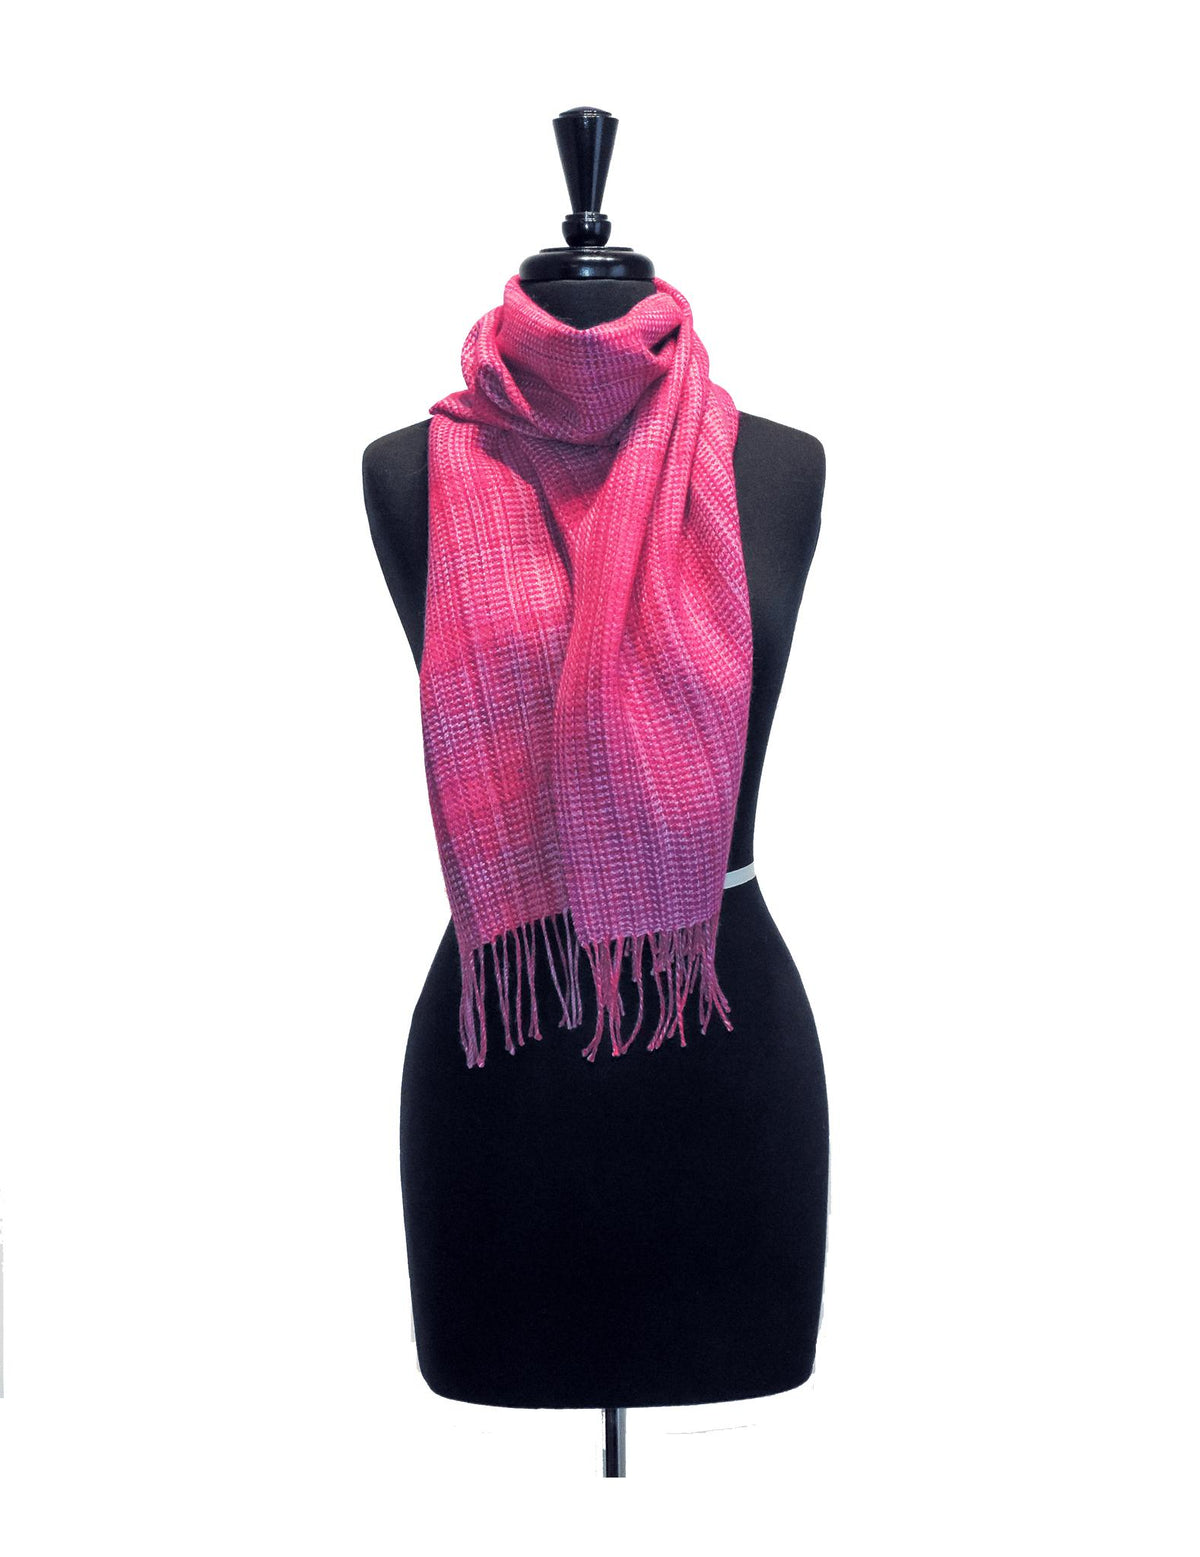 100% Baby Alpaca Woven Scarf - Hand-dyed Pink - Qinti - The Peruvian Shop